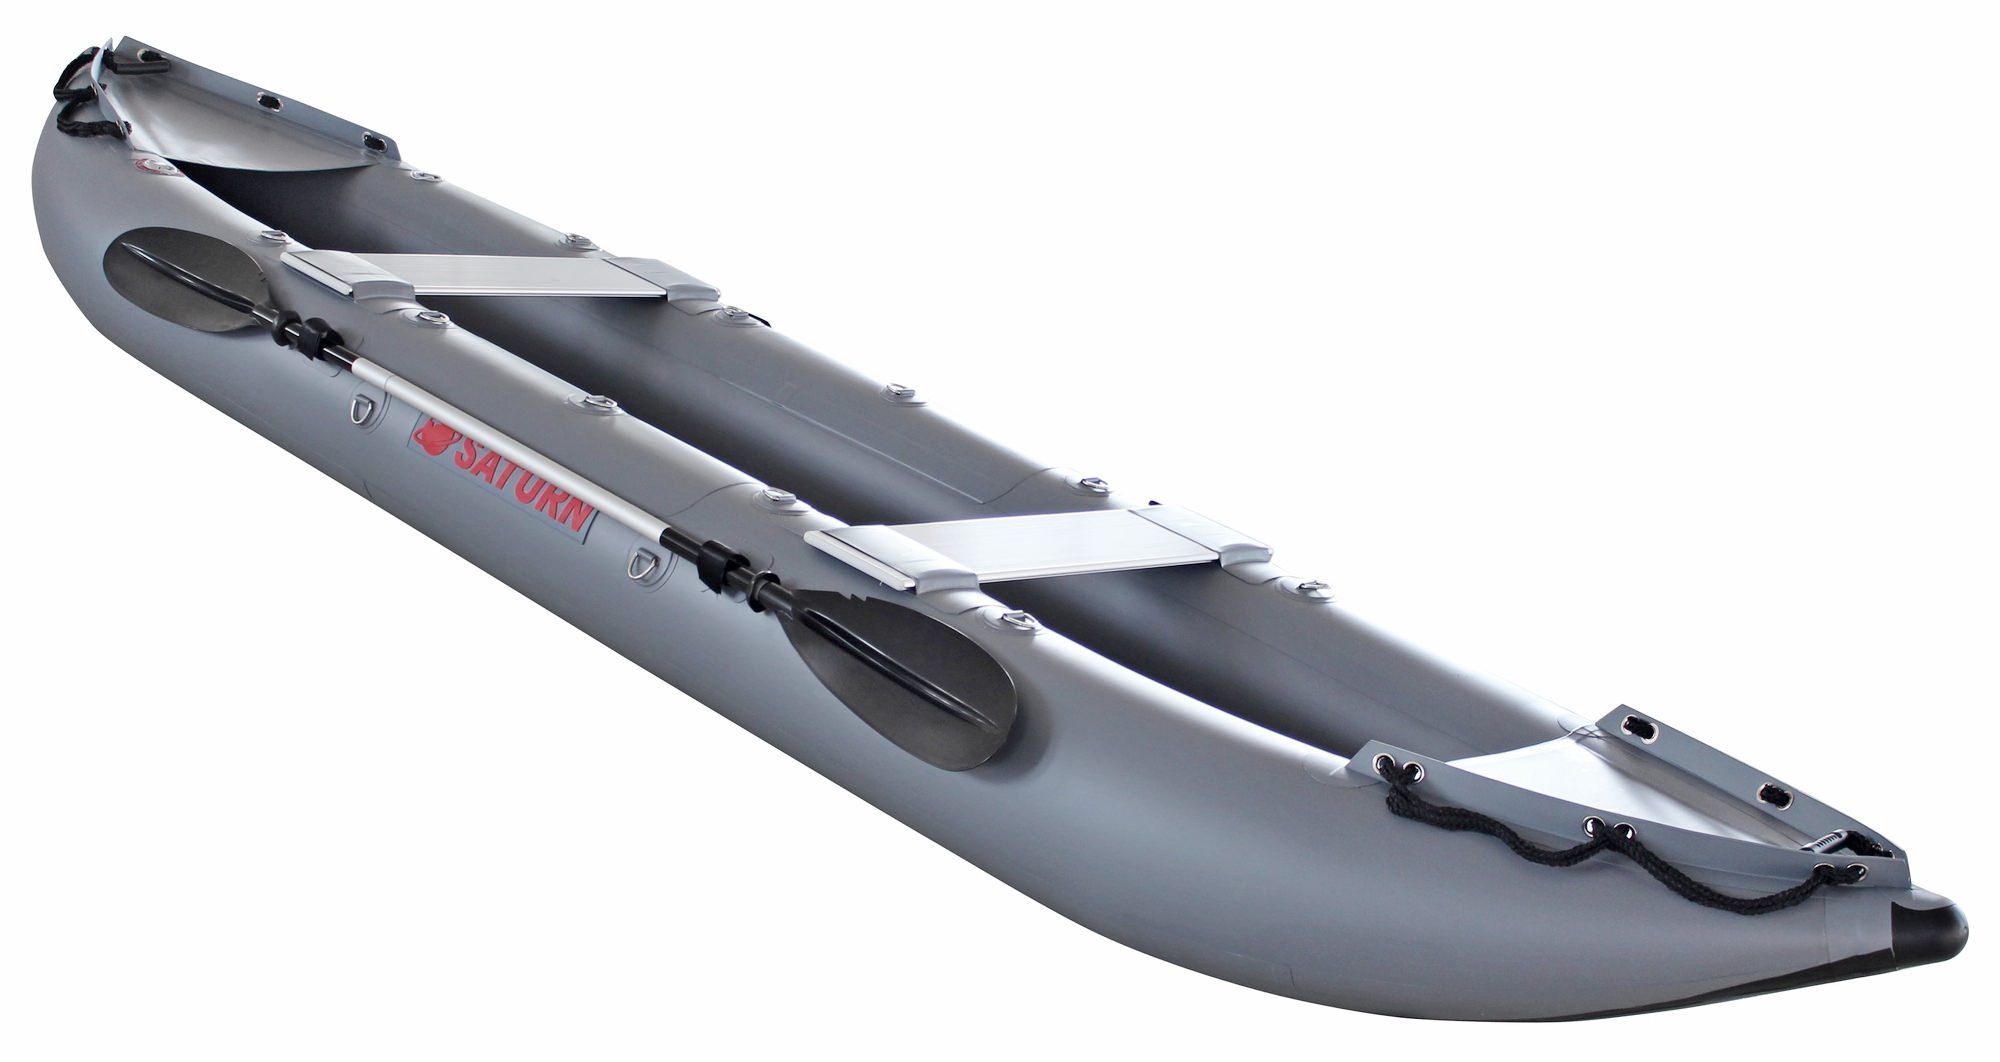 Large 2 Persons Angler Inflatable Fishing Kayaks On Sale. Low Price